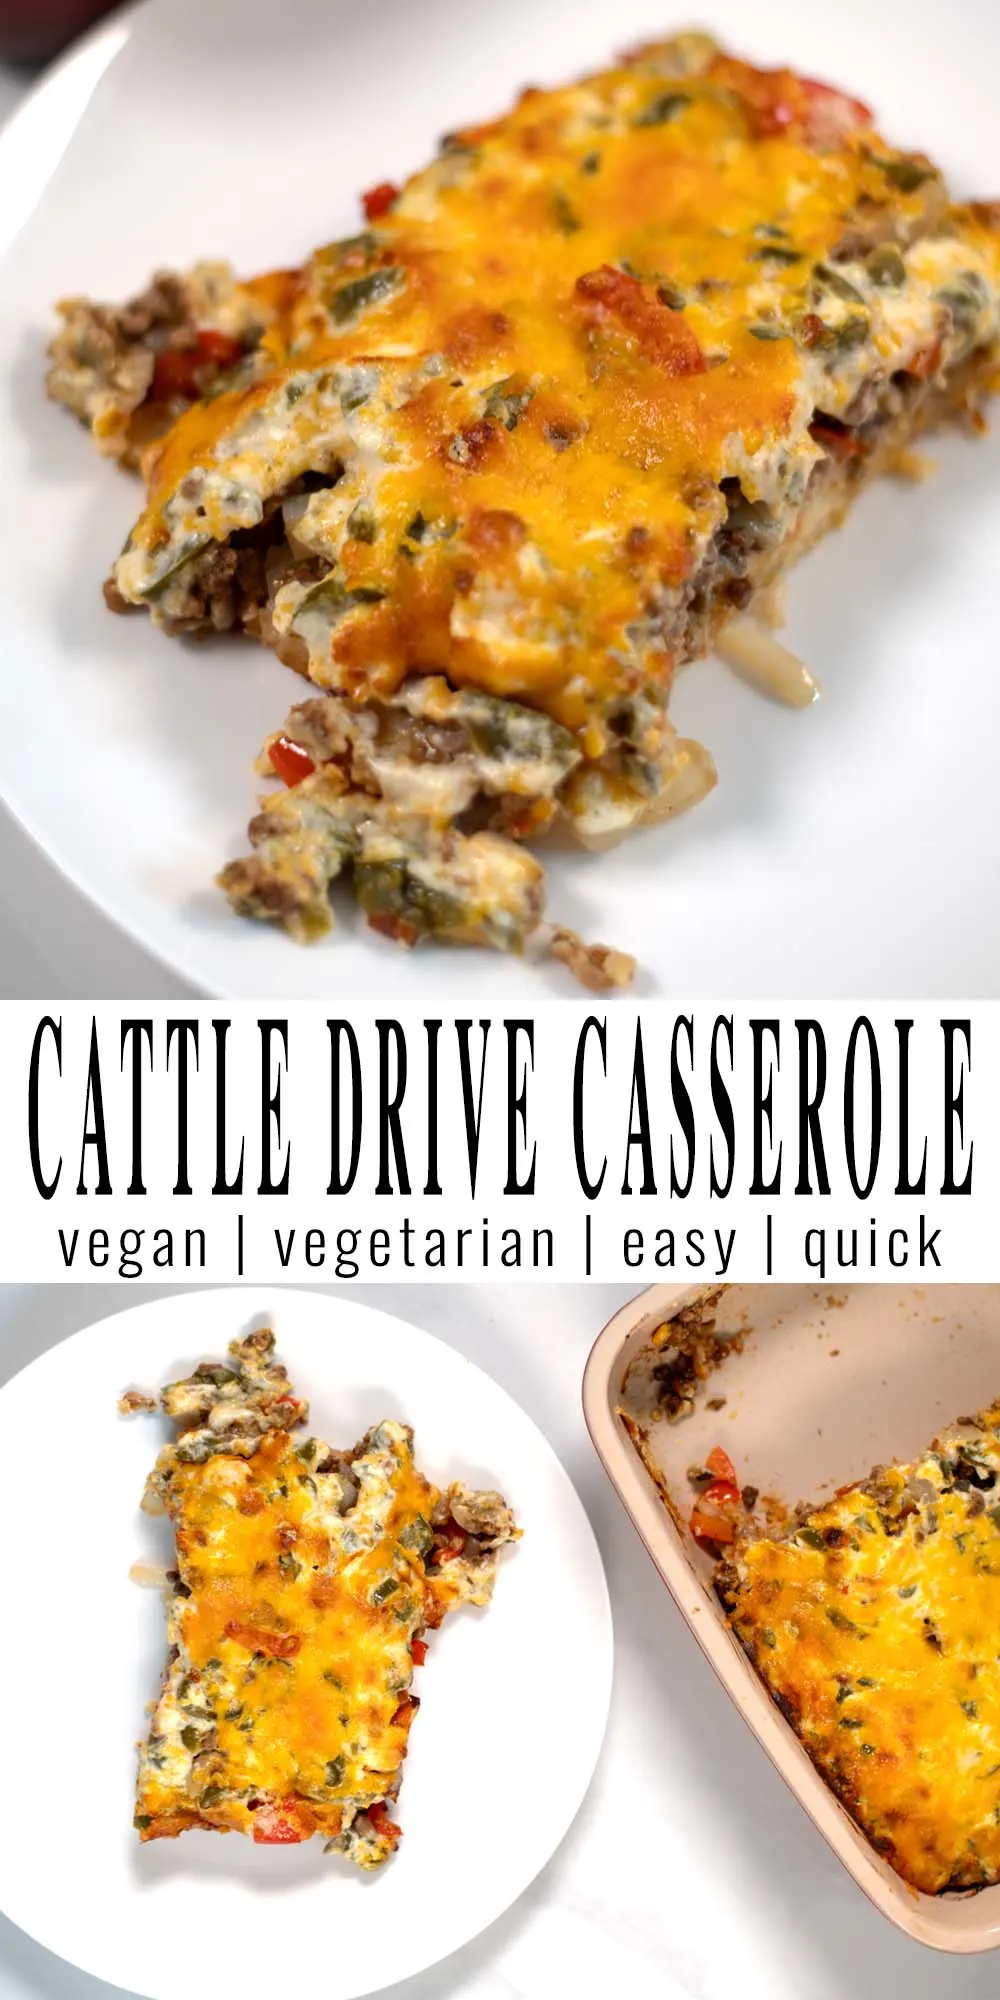 Collage of two photos of Cattle Drive Casserole with recipe title text.